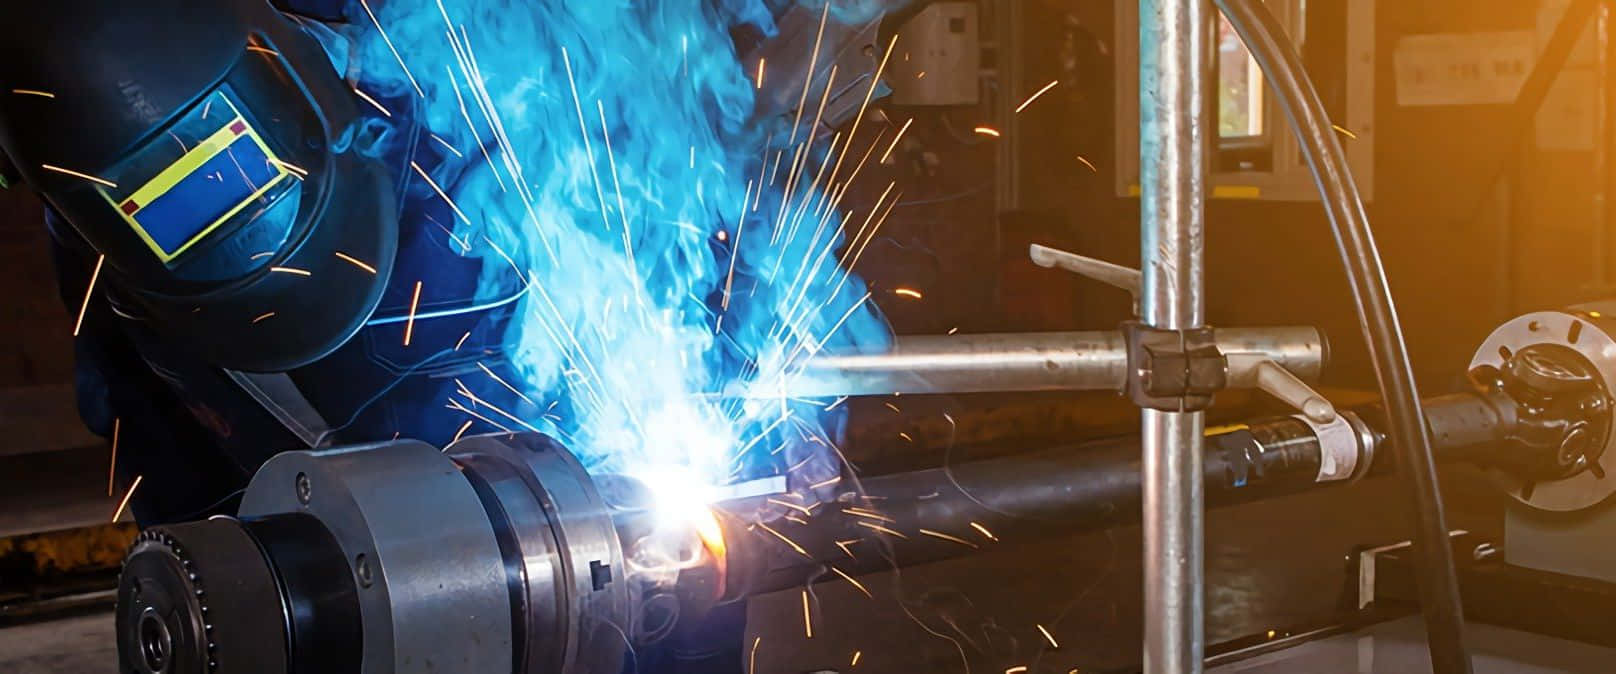 A Worker Is Welding A Metal Pipe With Blue Flames Background